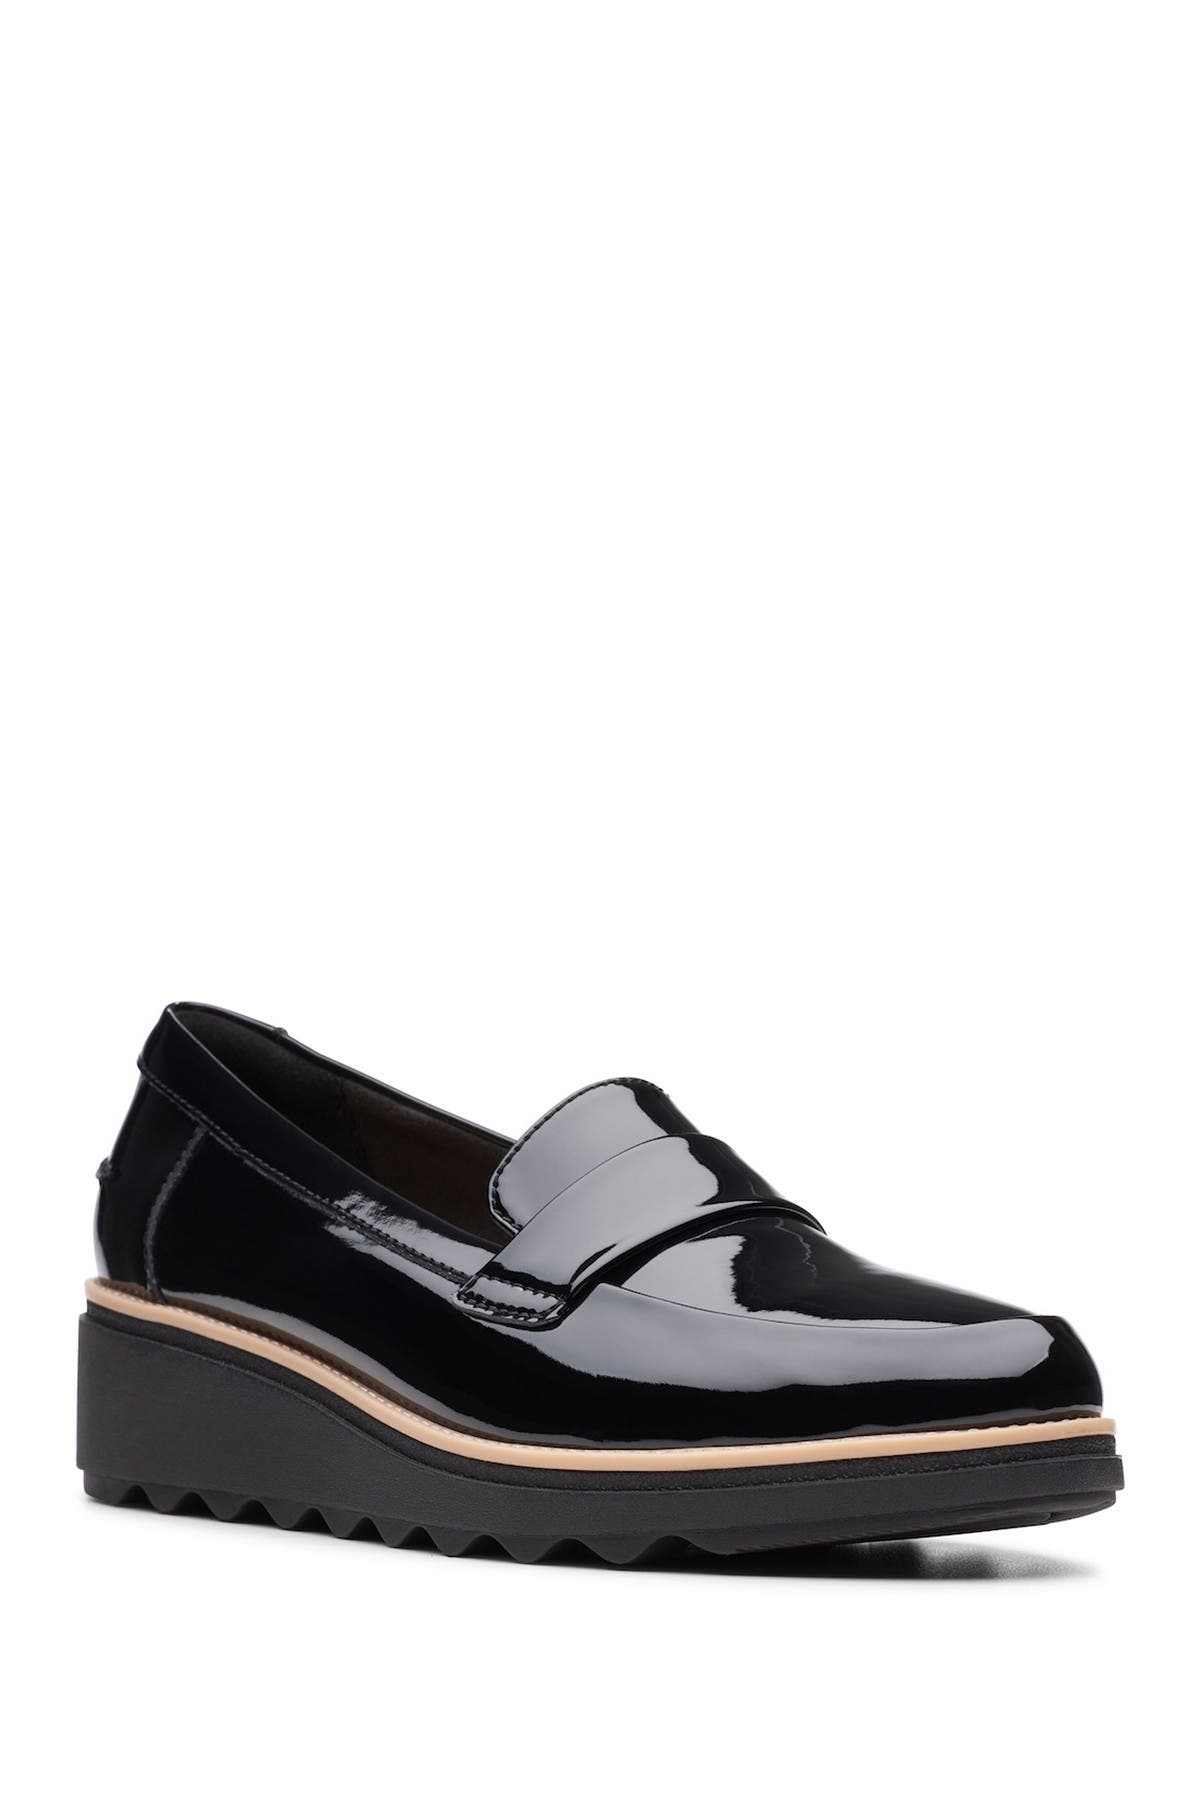 clarks wedge loafers